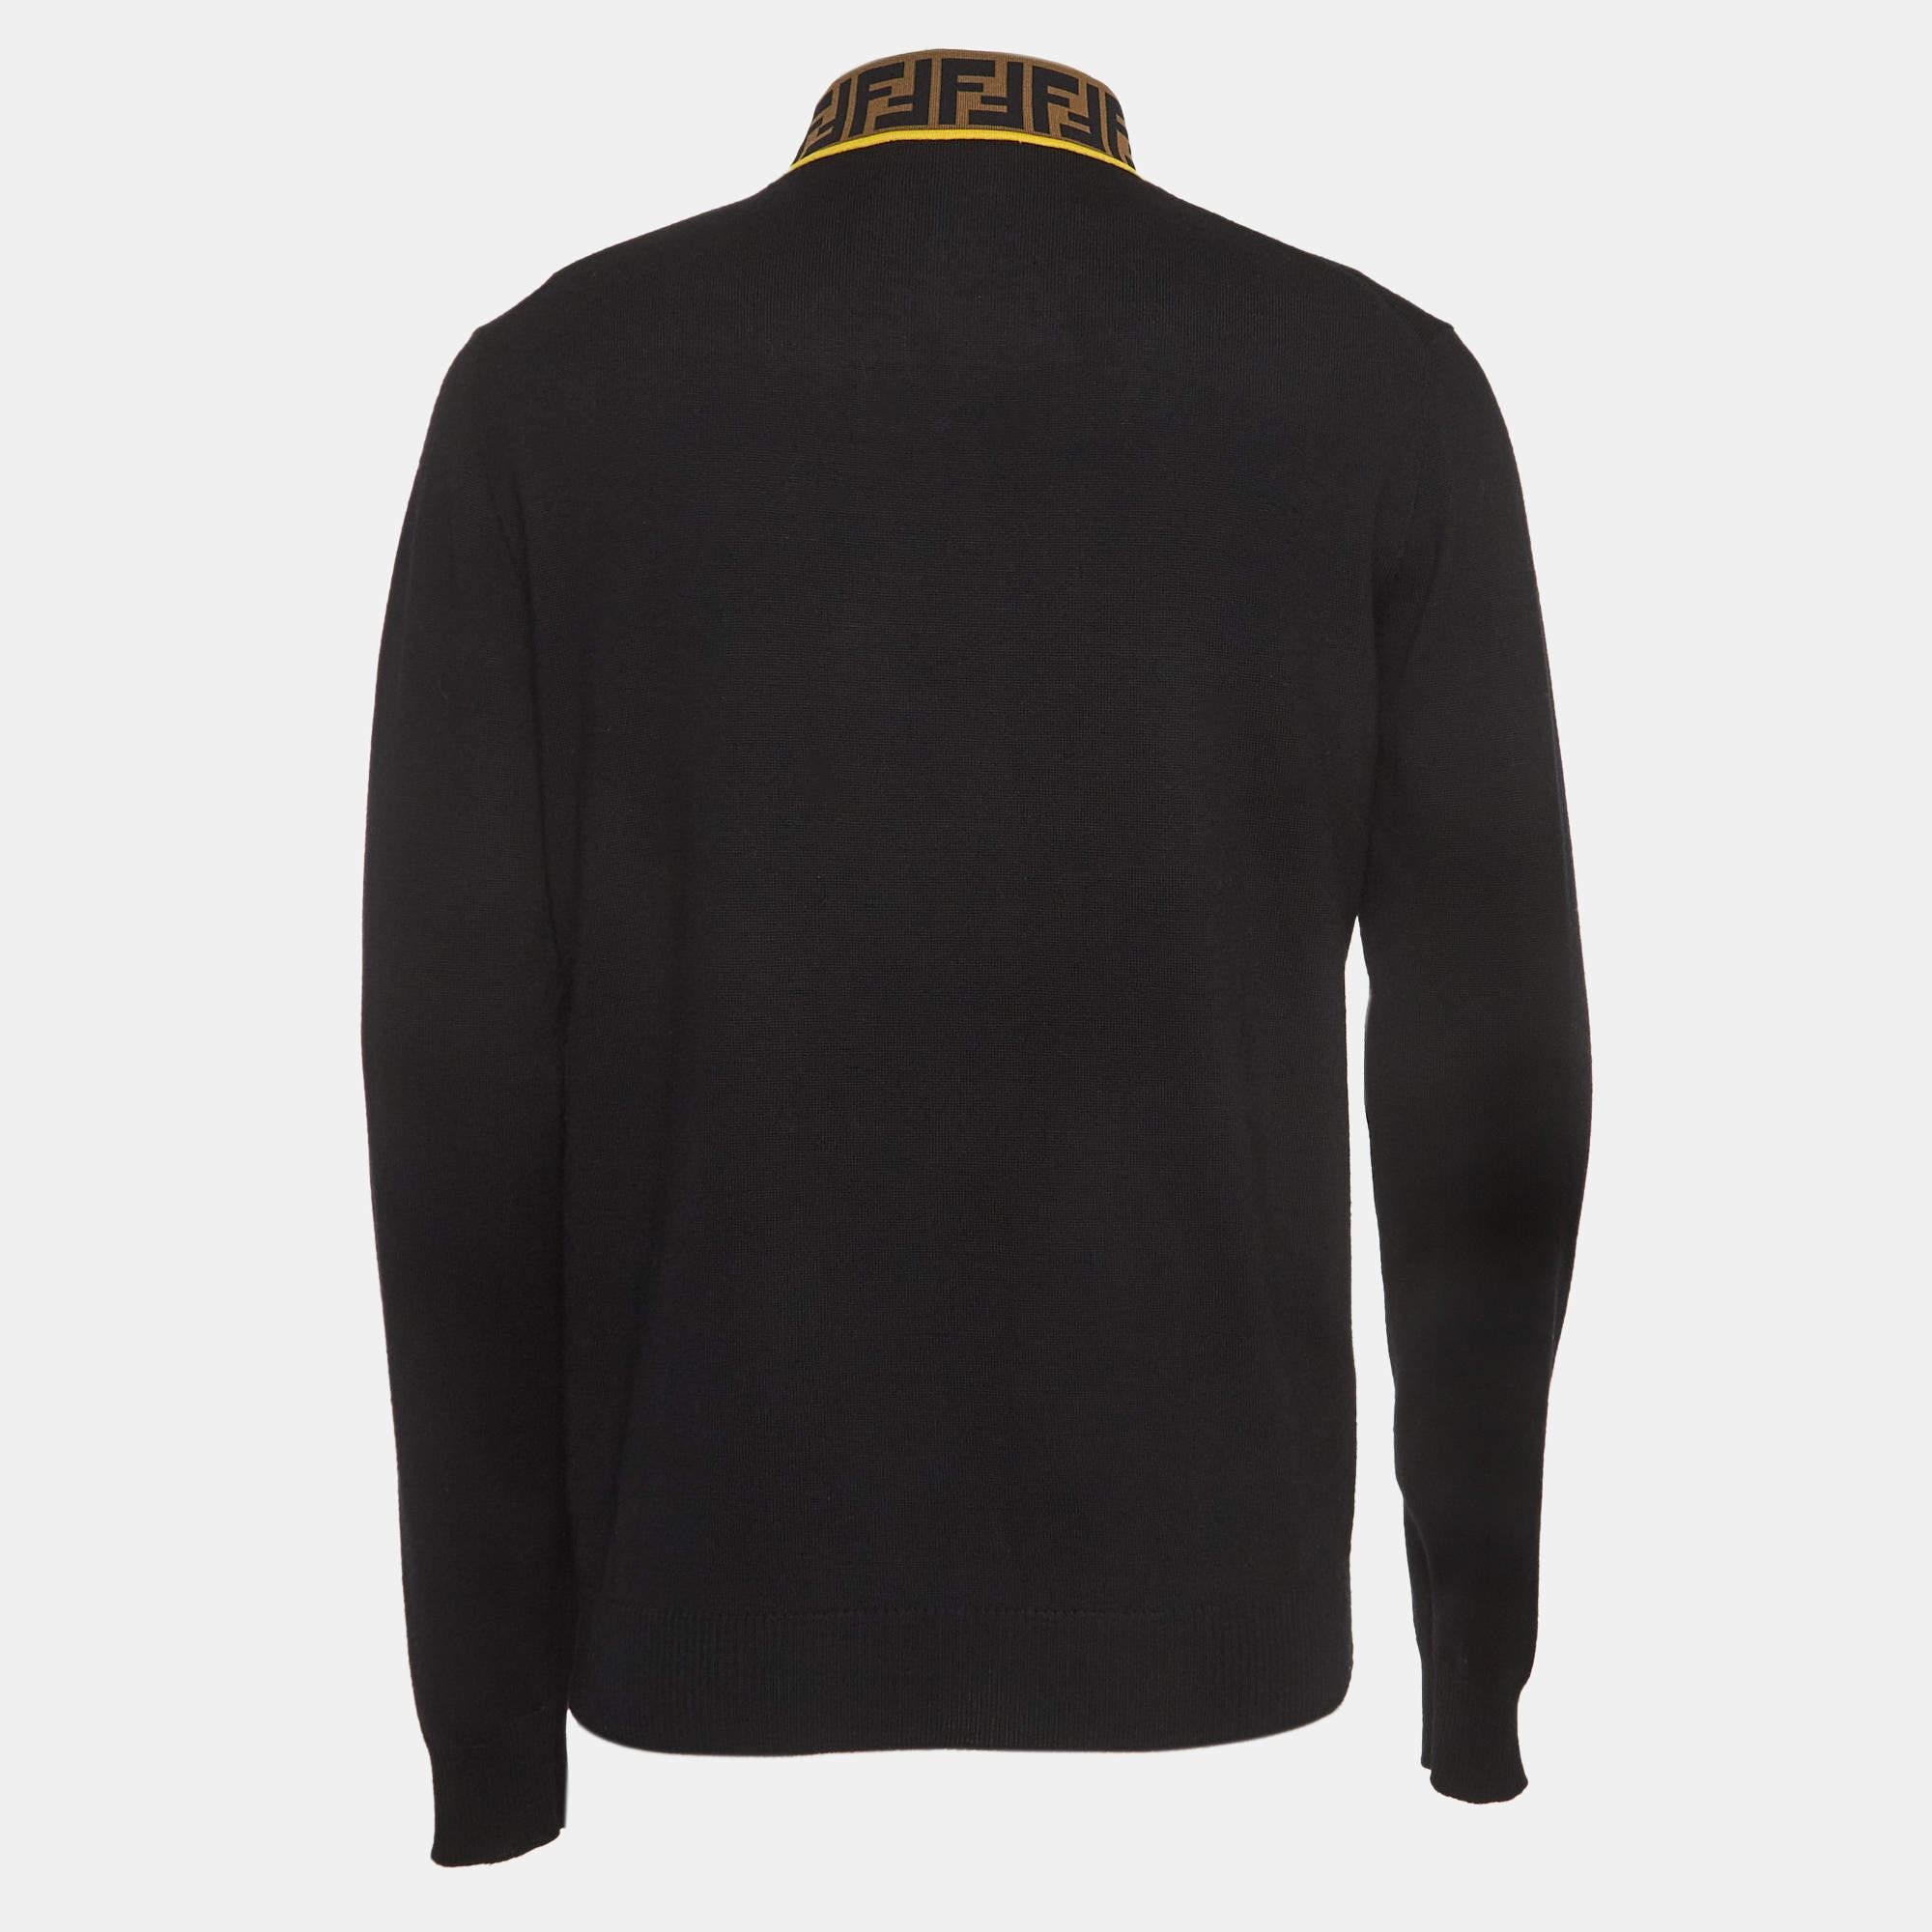 This pullover from Fendi is for those who love the right blend of fashion and comfort. It is made from a wool blend and designed with long sleeves and the logo trim on the neckline.

